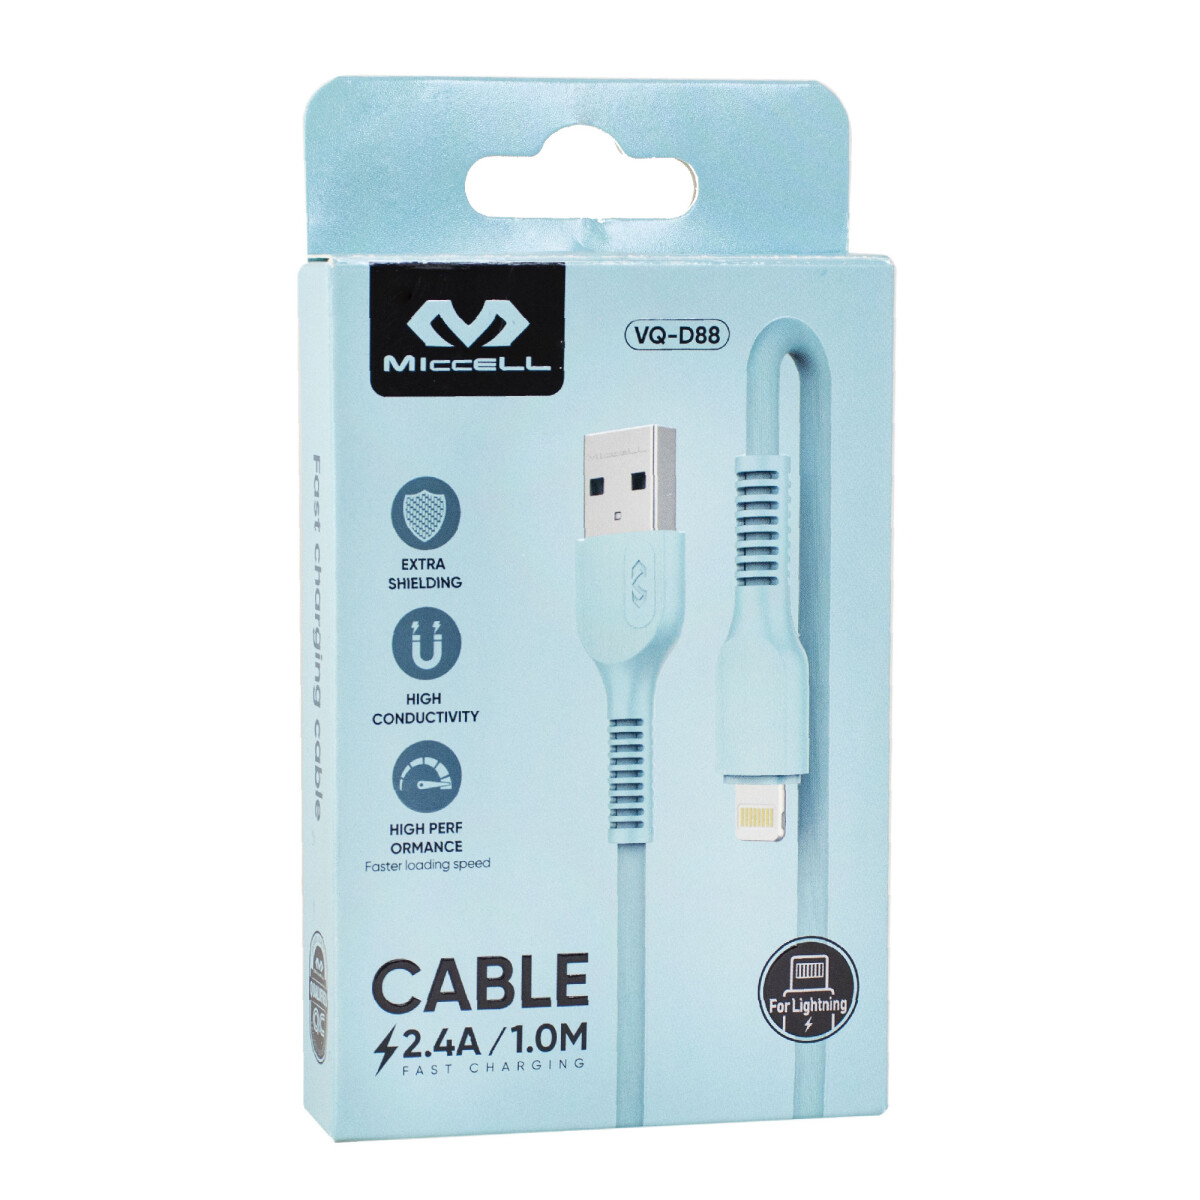 Cable Para iPhone Miccell 2.4a 1.0m Celeste 